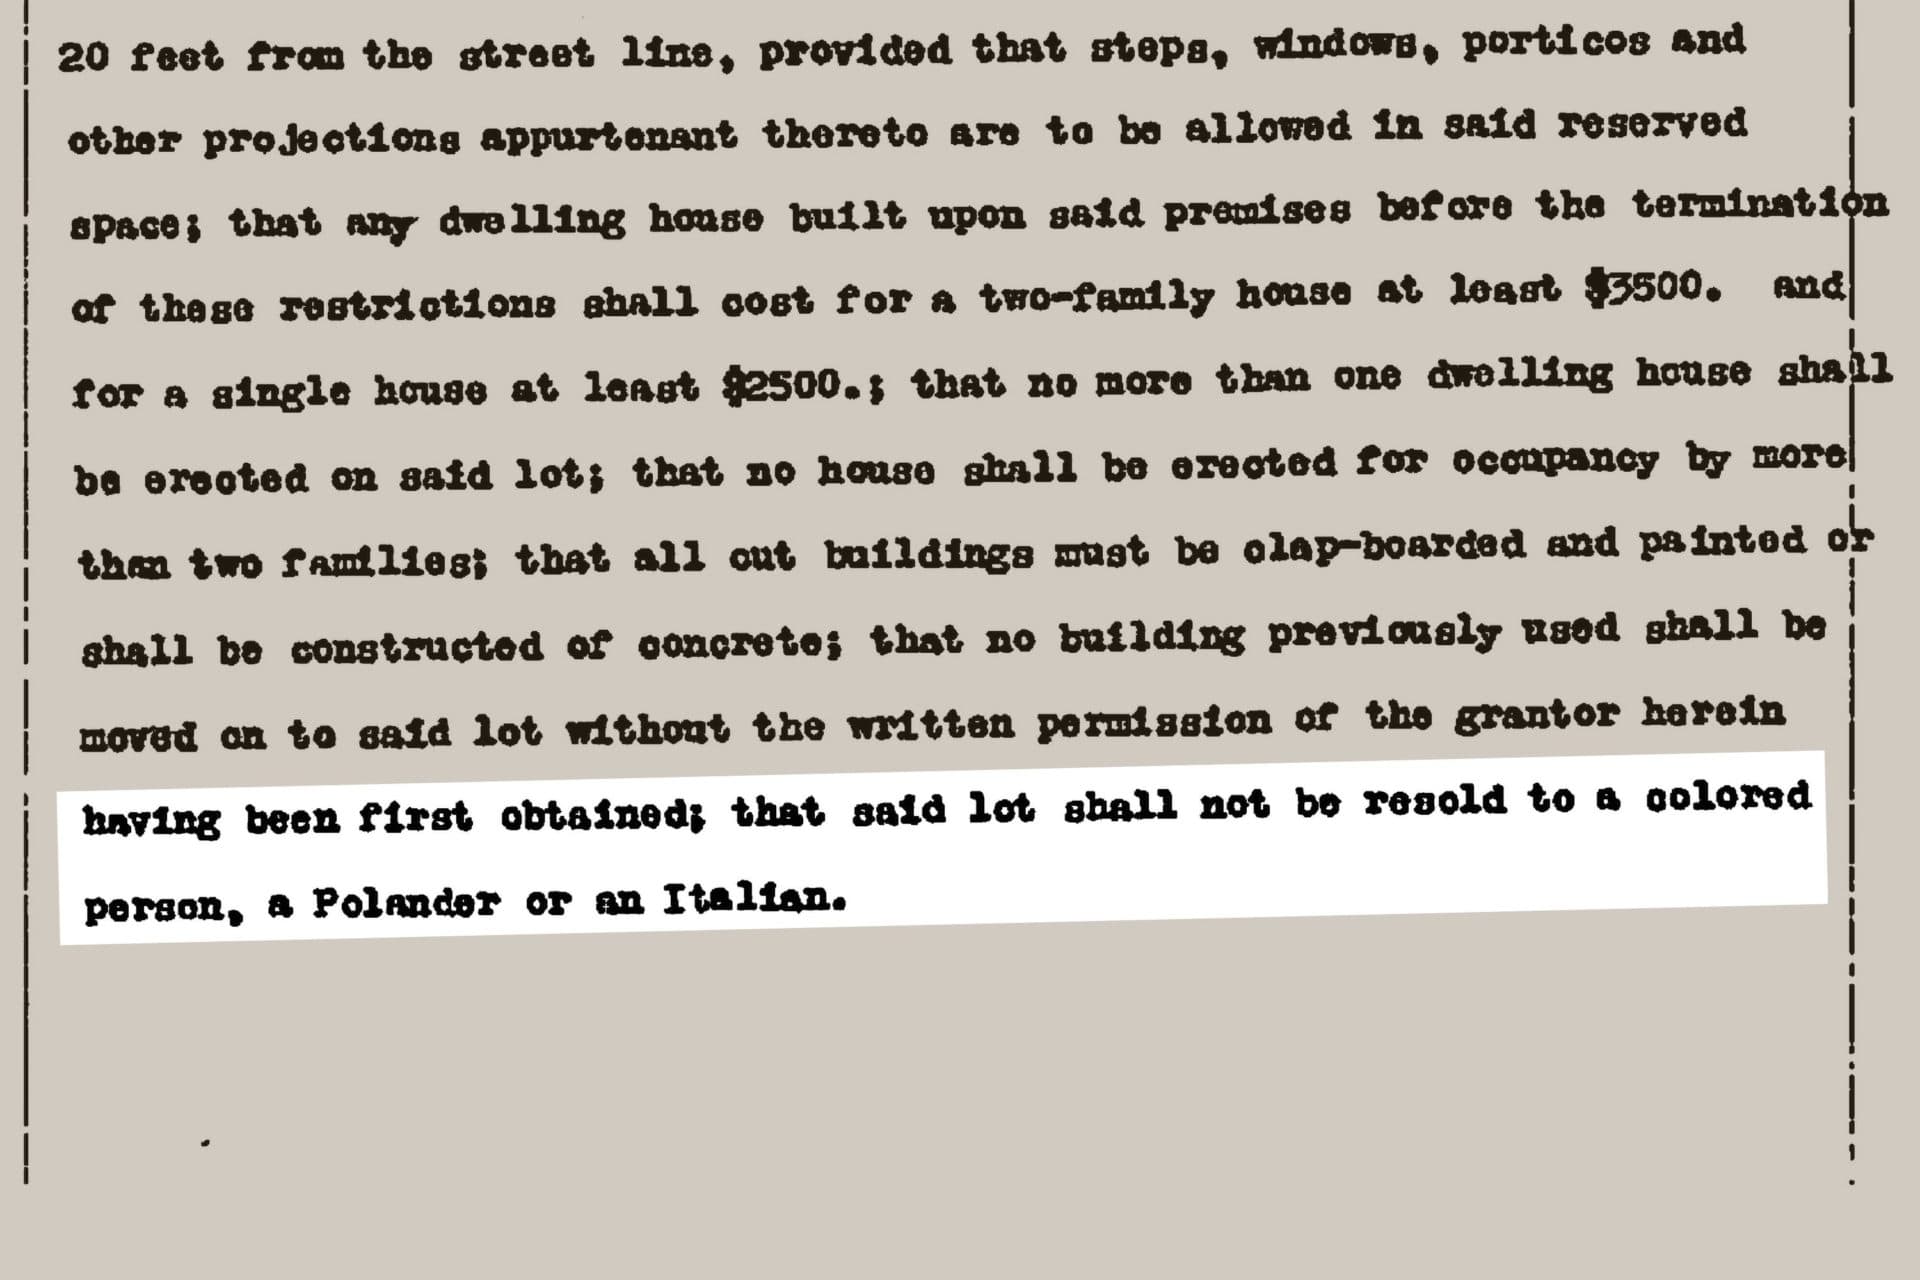 A deed from Springfield in 1916 states that the “lot shall not be resold to a colored person, a Polander or an Italian.” This language appears on the deeds for at least four separate properties sold by a single seller in Hampden County. (Courtesy of Hampden County Registry of Deeds)